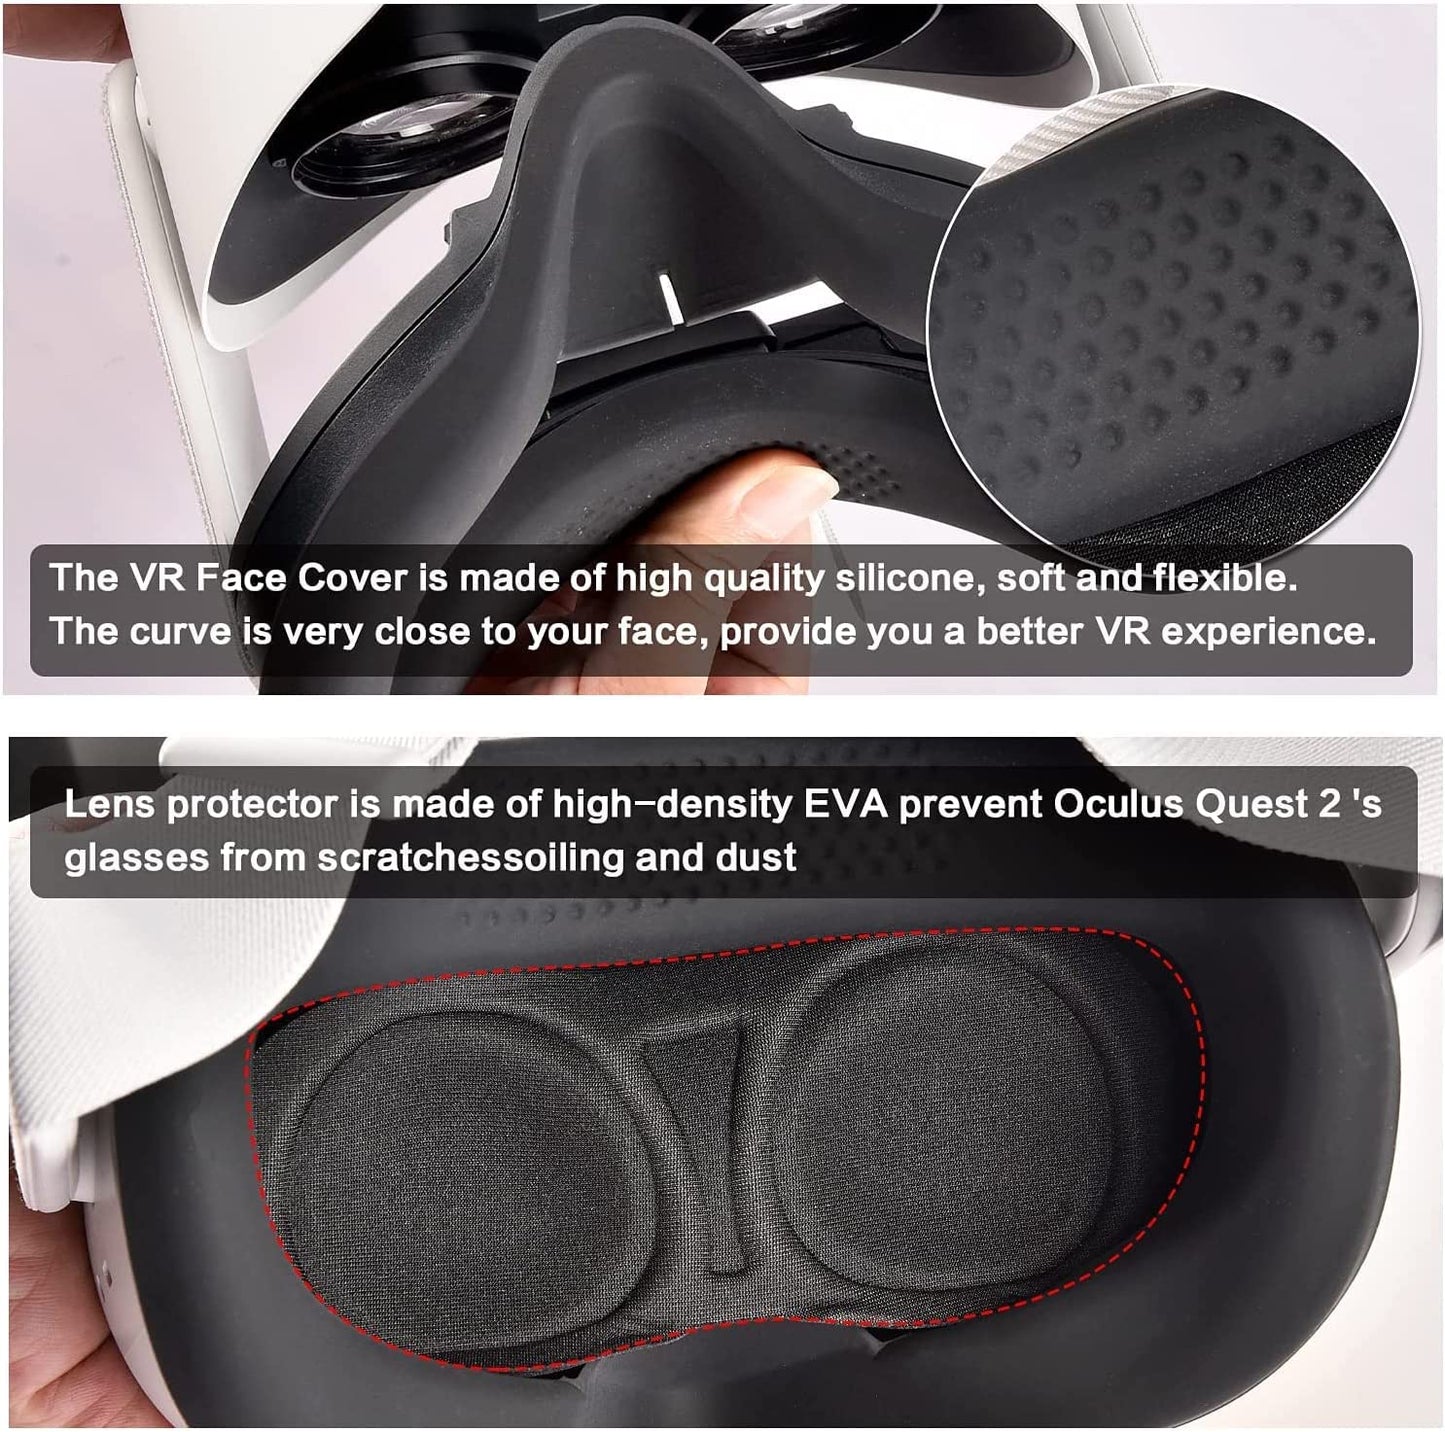 Durable Travel Case for Oculus Quest 2 VR Gaming Headset and Controllers, with Silicone Face Cover, Lens Protector, and Storage Bag 